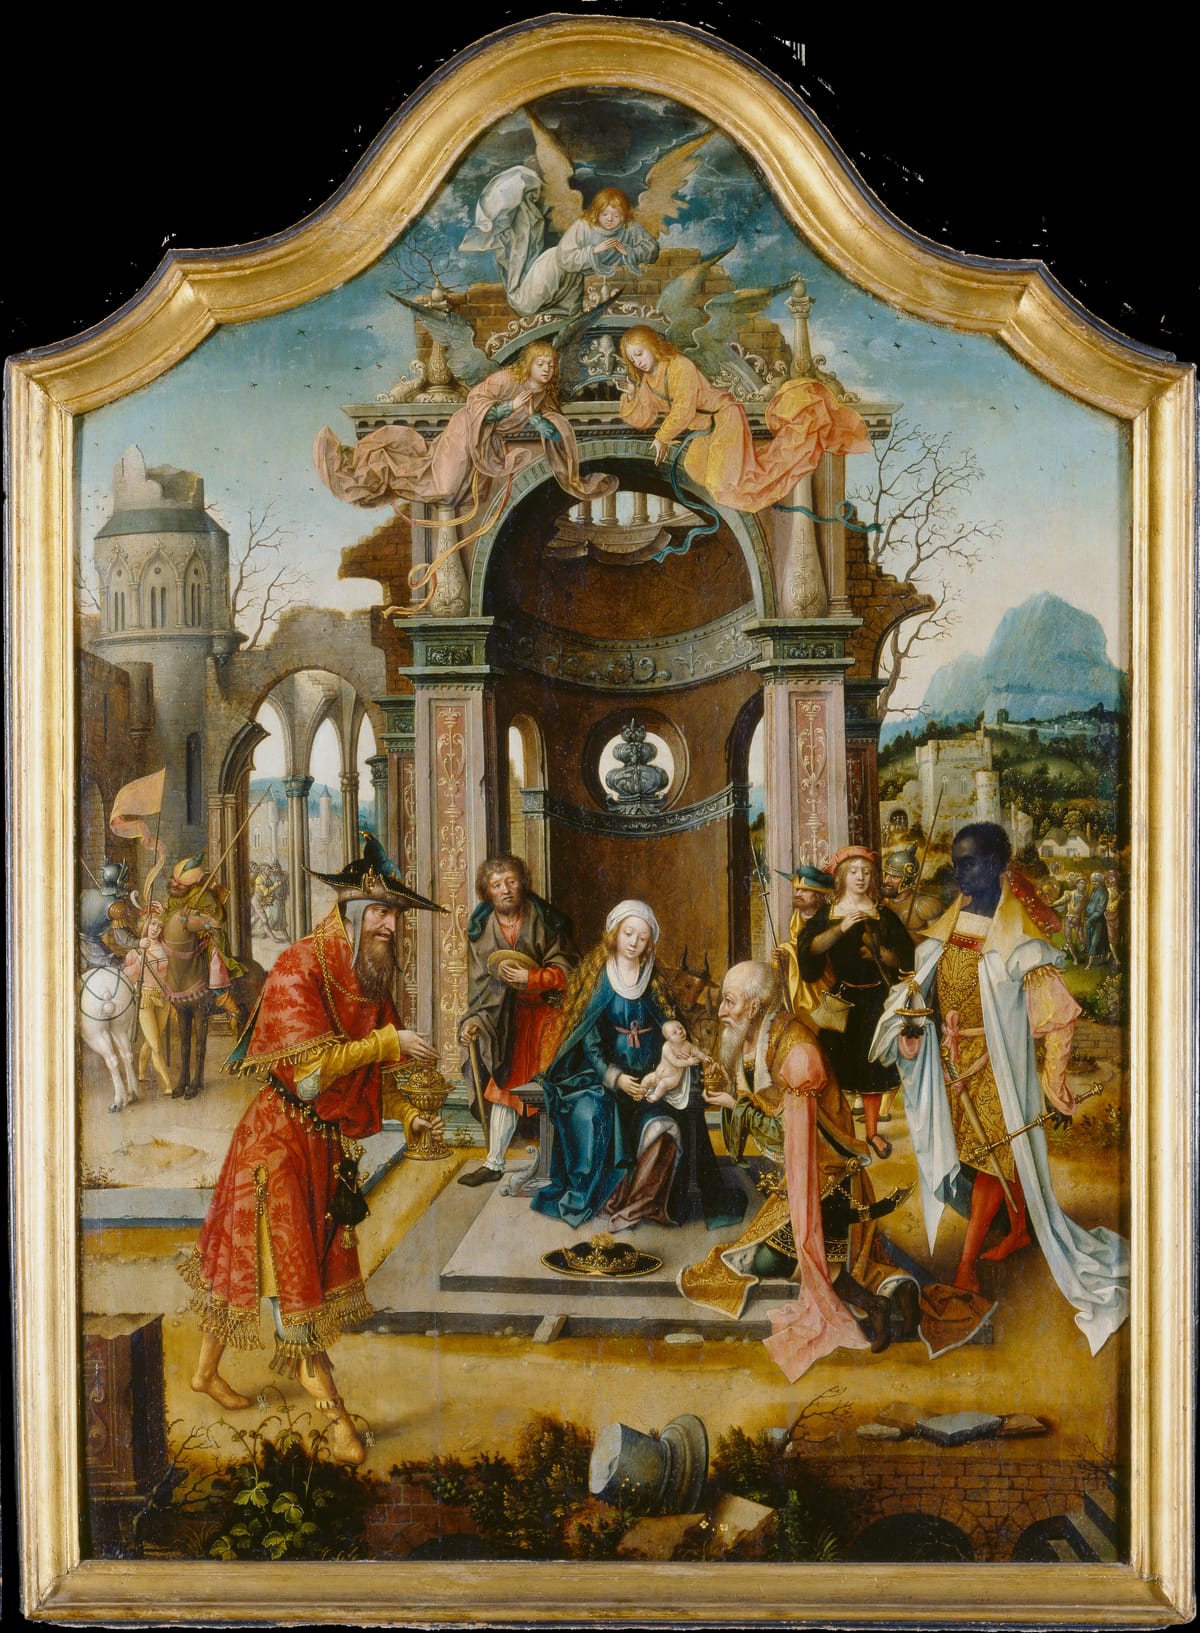 The Adoration of the Magi (1516-1519) by Master of the Von Groote Adoration - Public Domain Catholic Painting